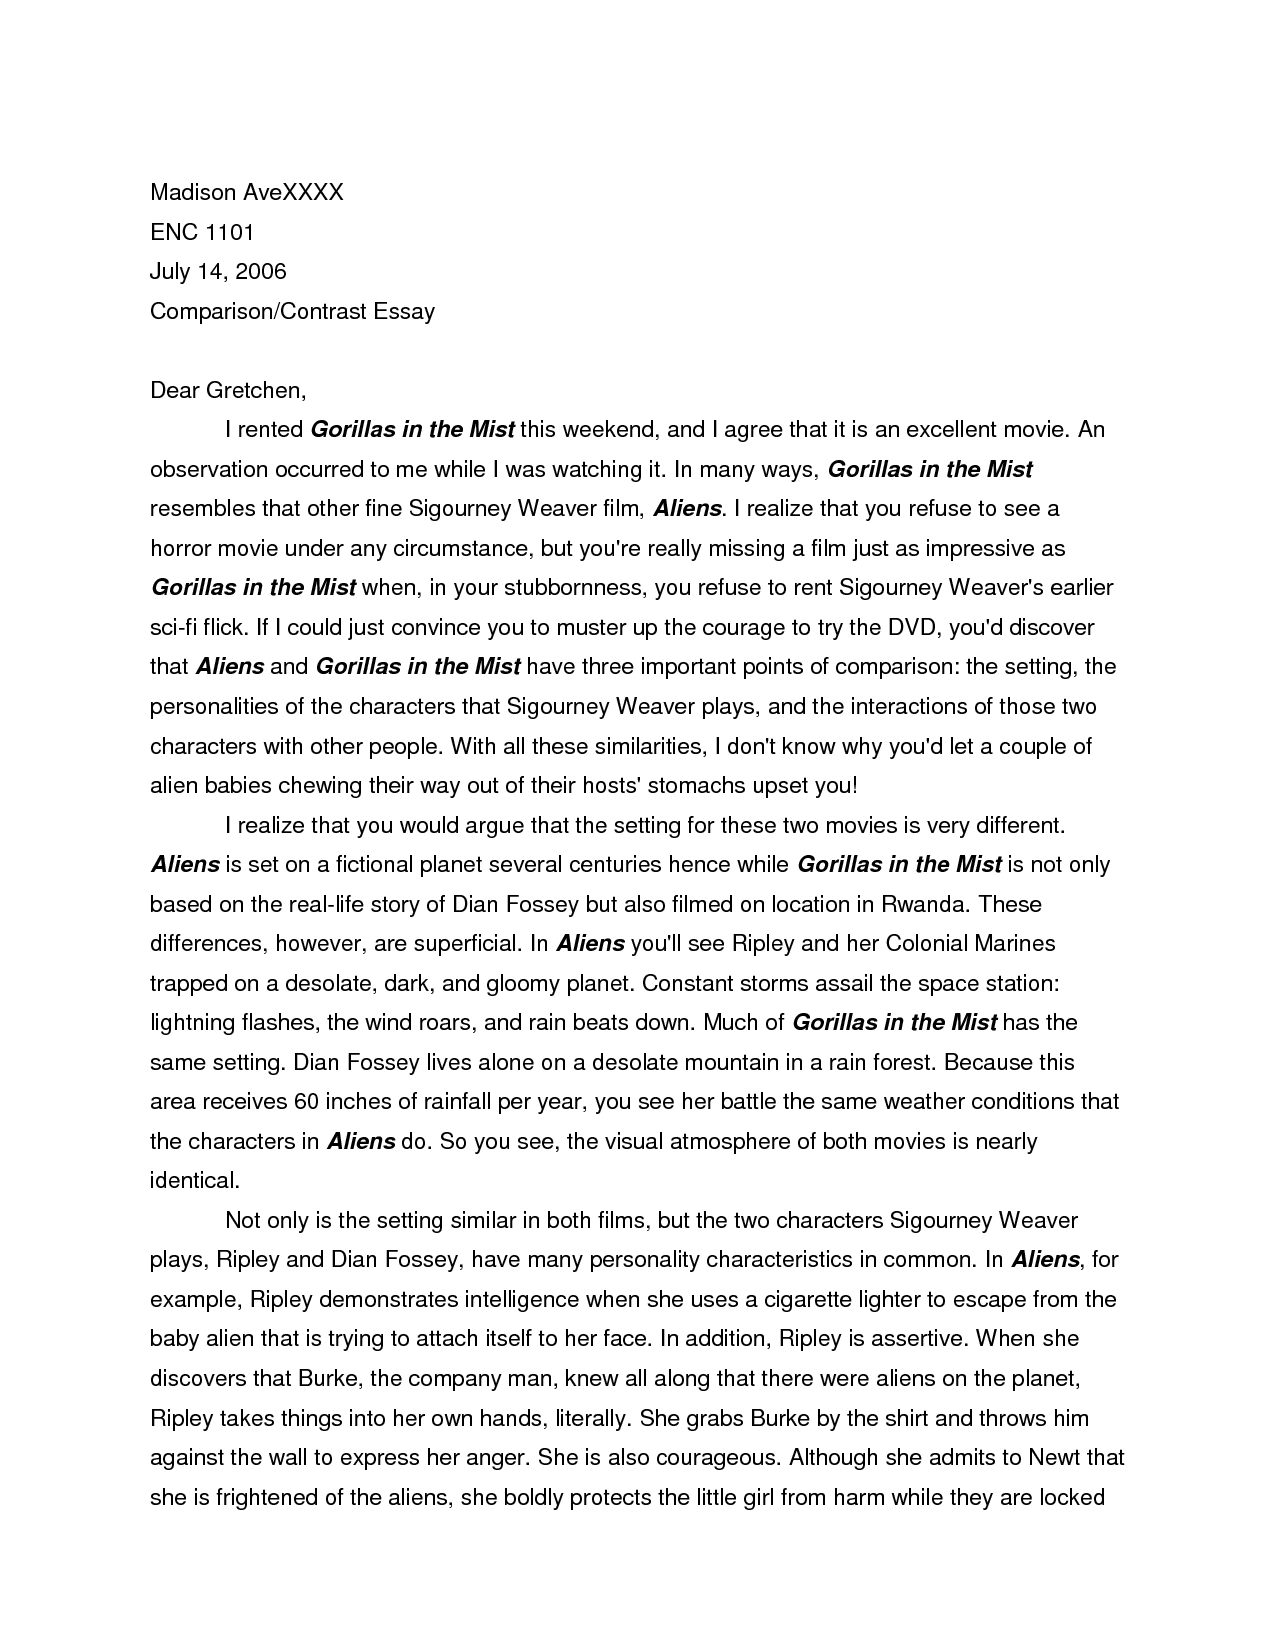 Similarities and differences essay